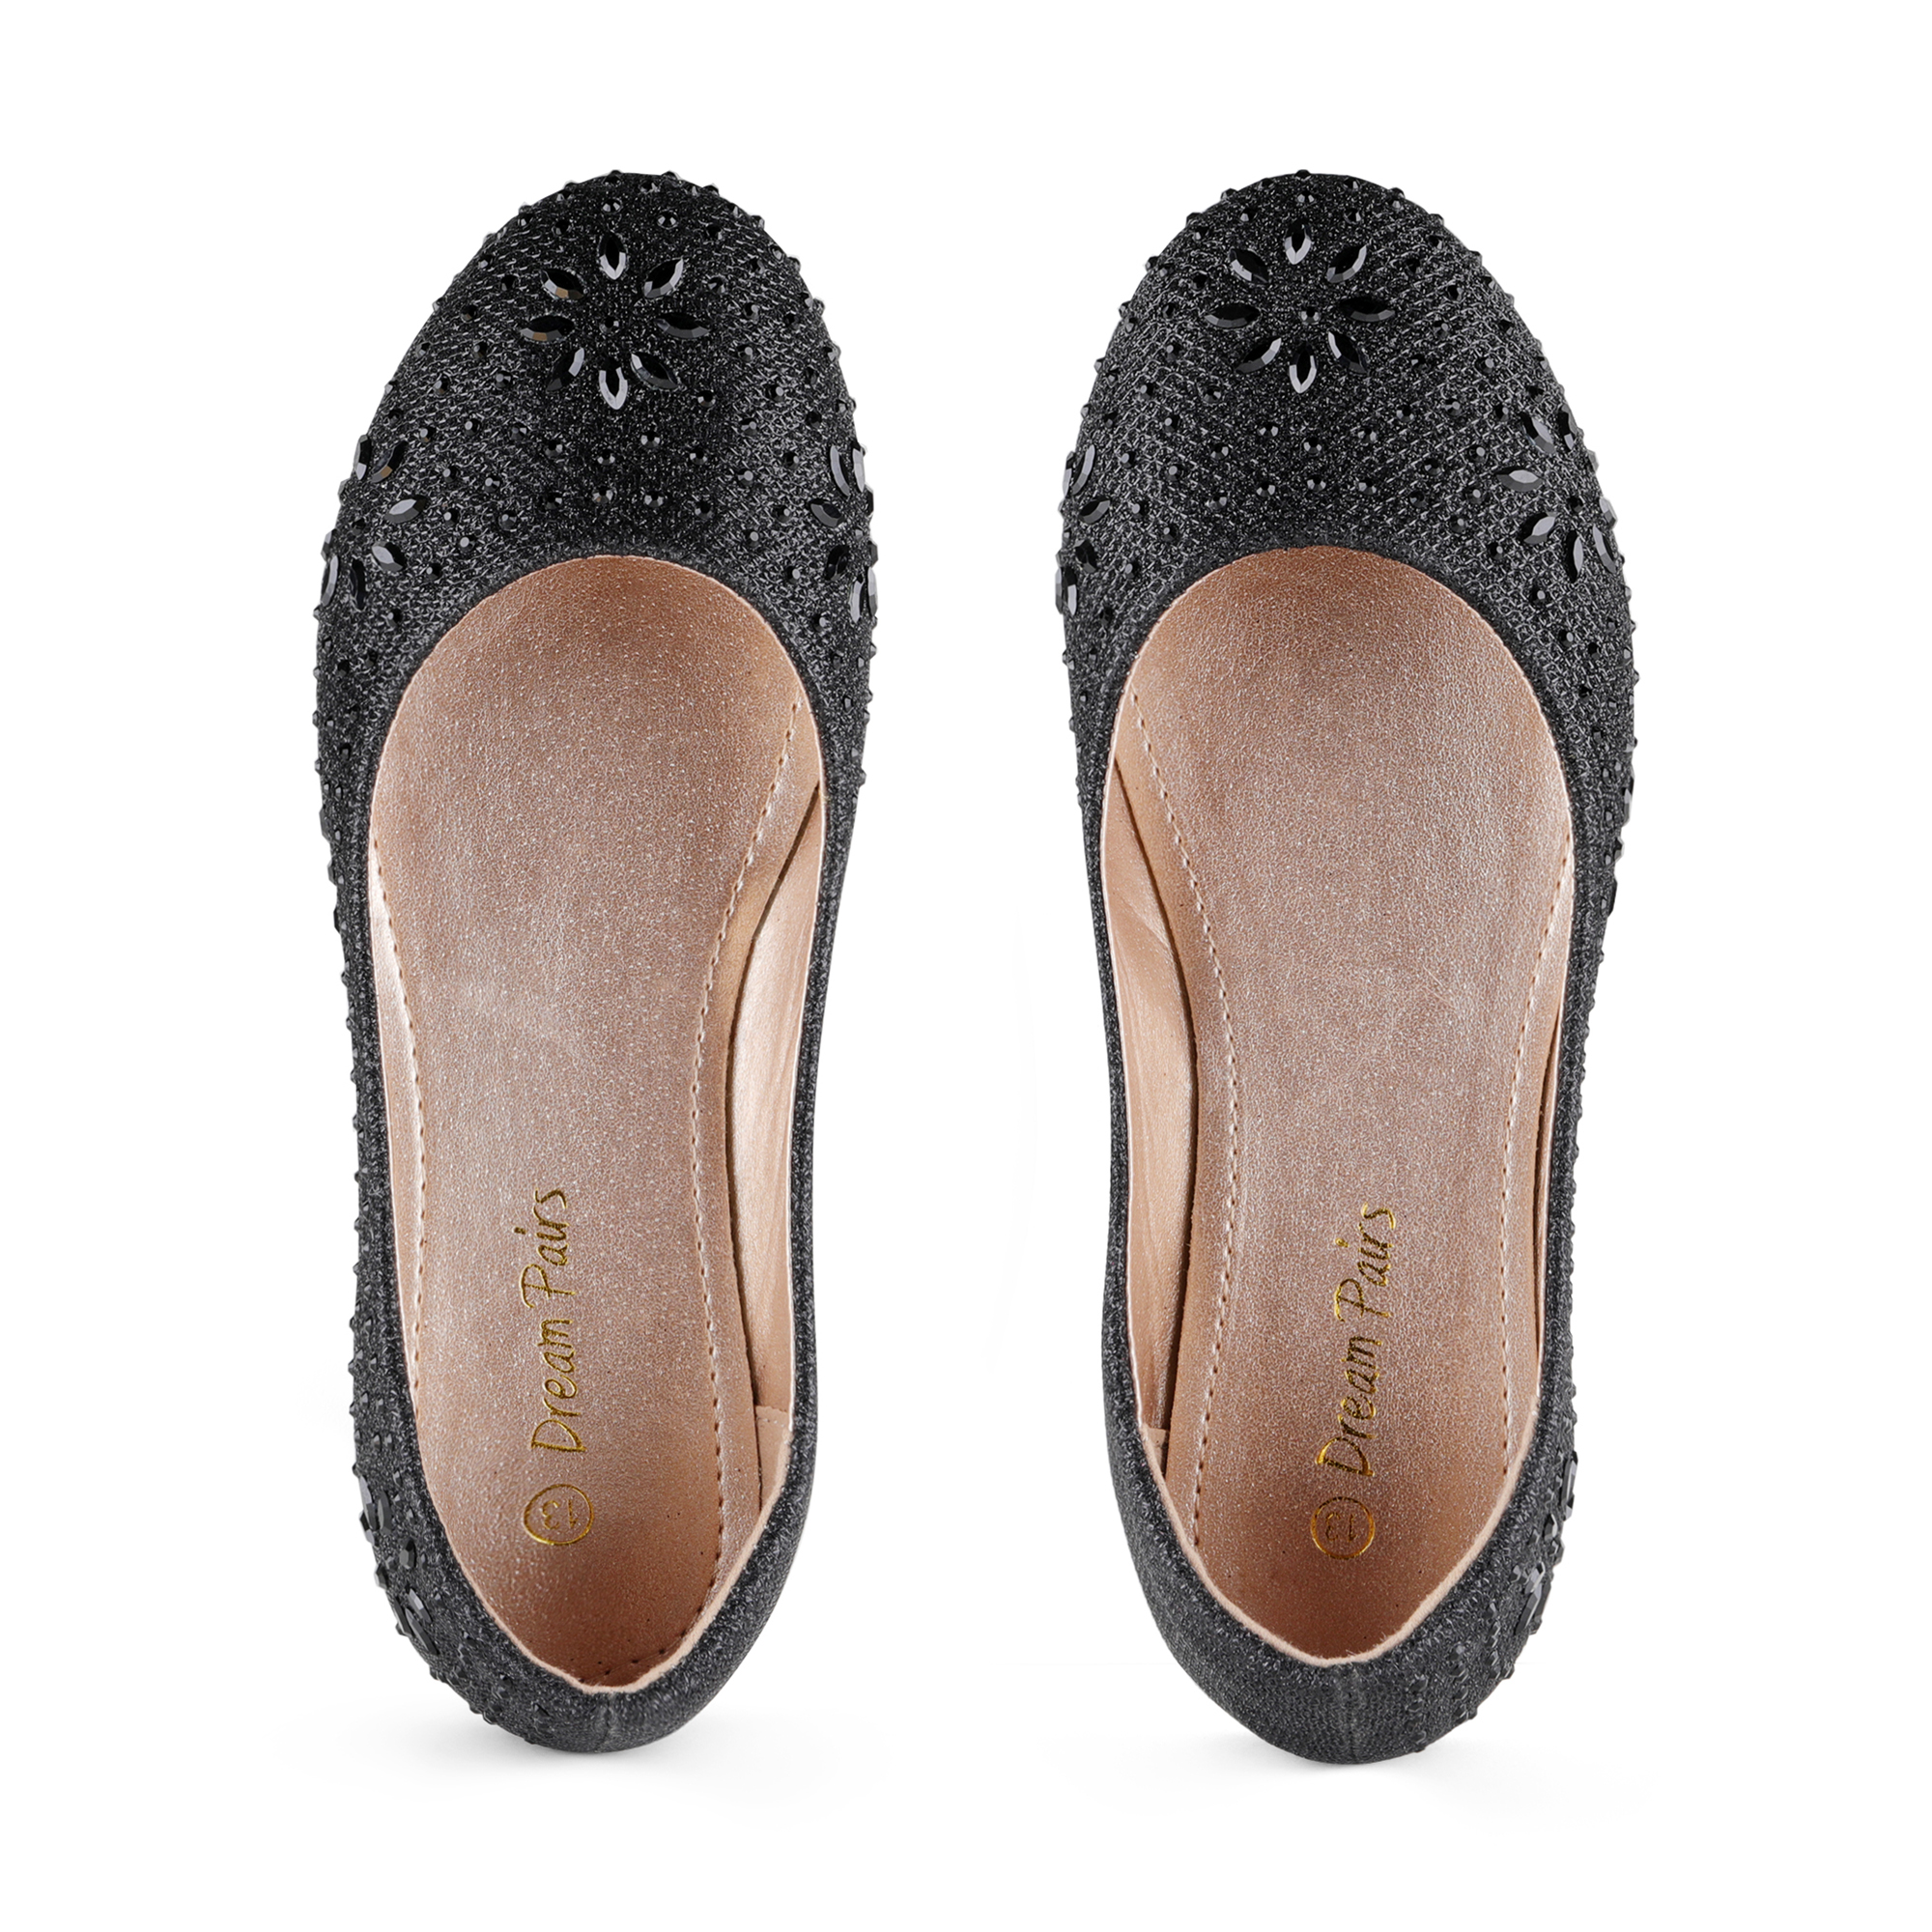 Dream Pairs Kids Girls Slip-On Shoes Children Party Dress Dance Shoes Flat Shoes NINA-100 BLACK/GLITTER Size 12 - image 5 of 6